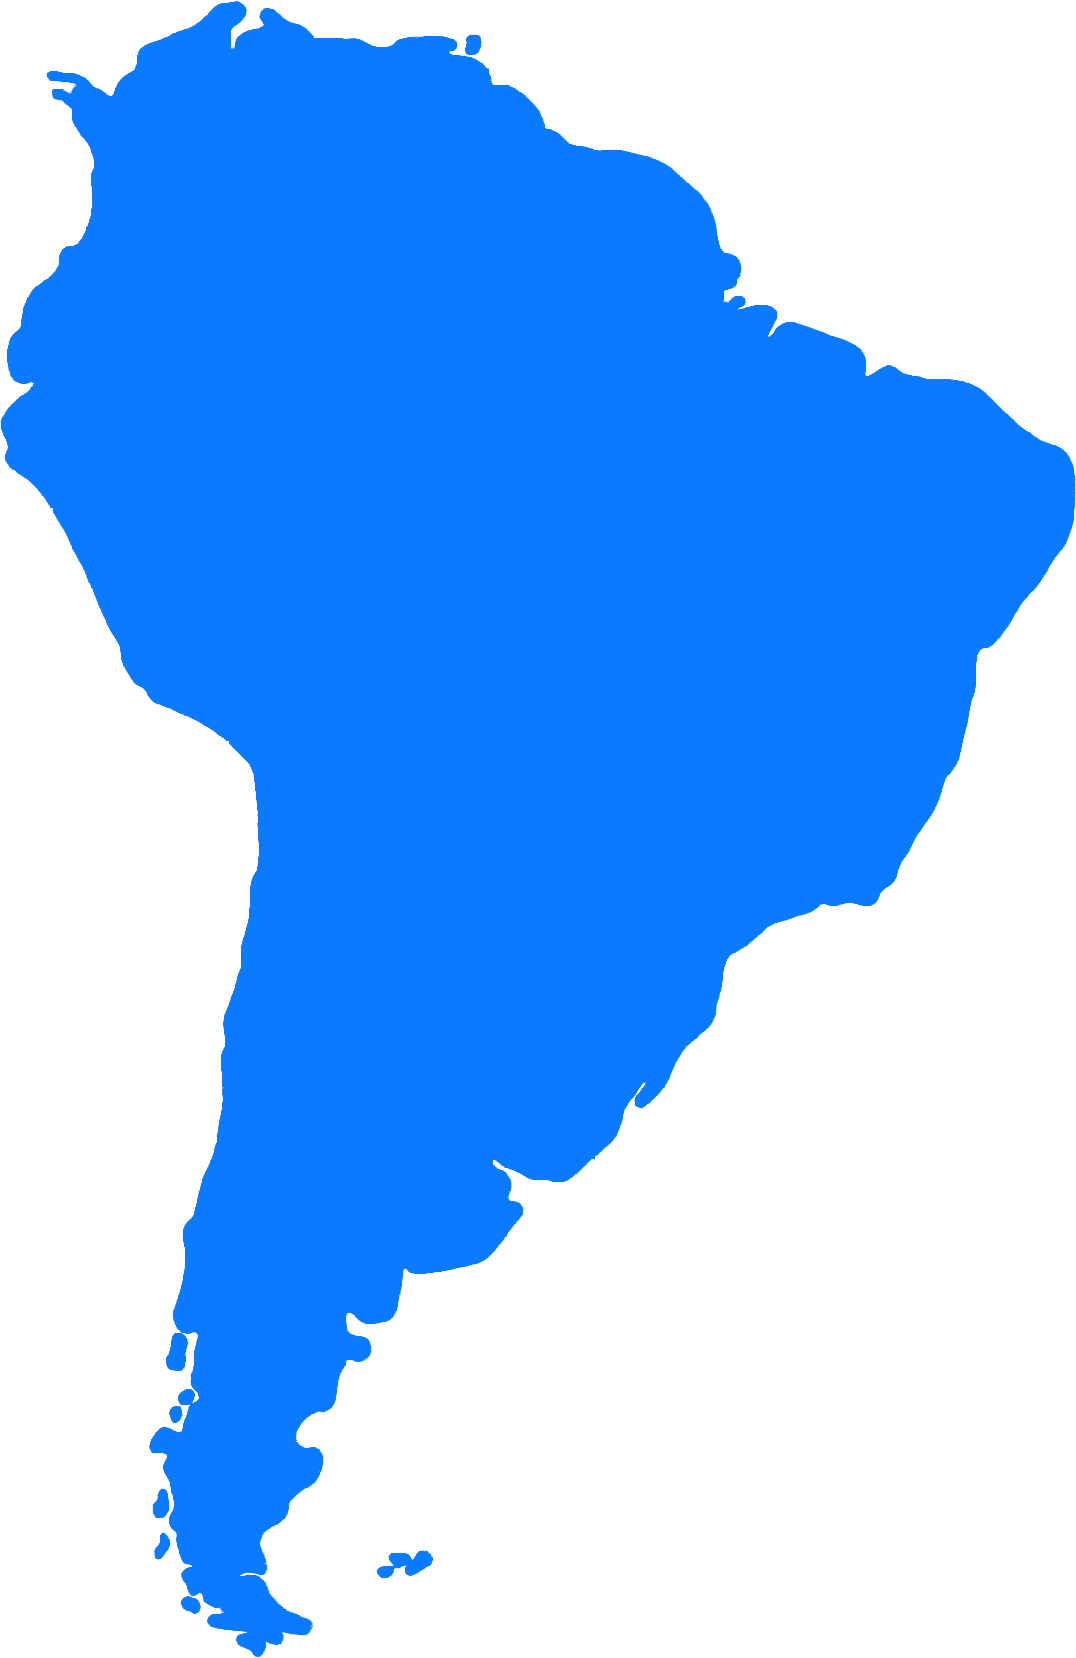 South America Blue Map Silhouette PNG